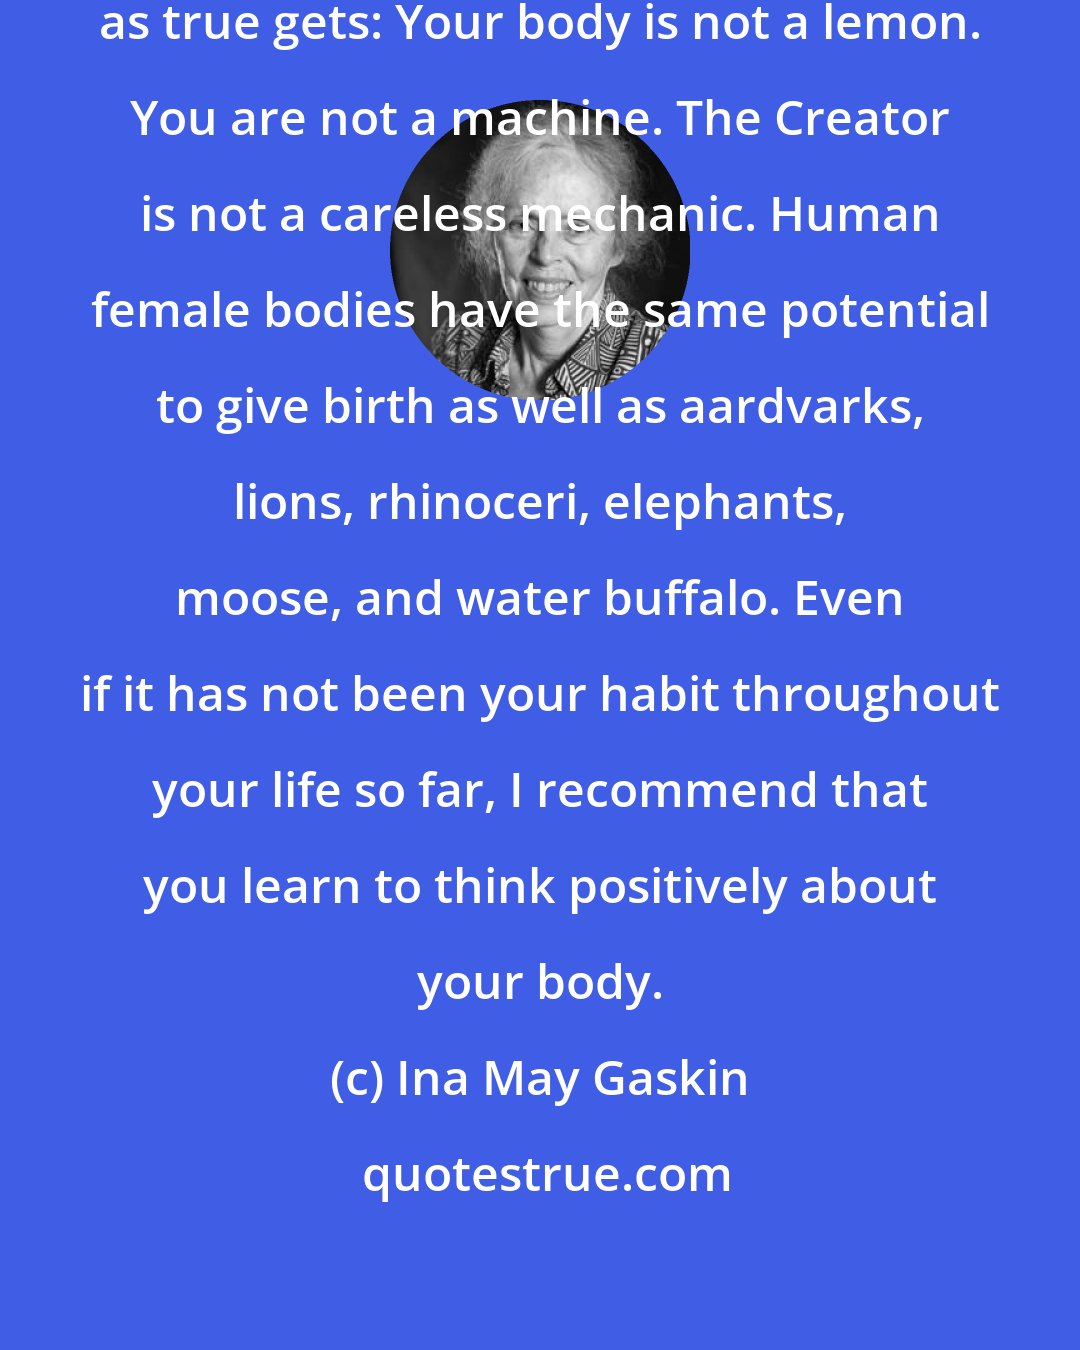 Ina May Gaskin: Remember this, for it is as true as true gets: Your body is not a lemon. You are not a machine. The Creator is not a careless mechanic. Human female bodies have the same potential to give birth as well as aardvarks, lions, rhinoceri, elephants, moose, and water buffalo. Even if it has not been your habit throughout your life so far, I recommend that you learn to think positively about your body.